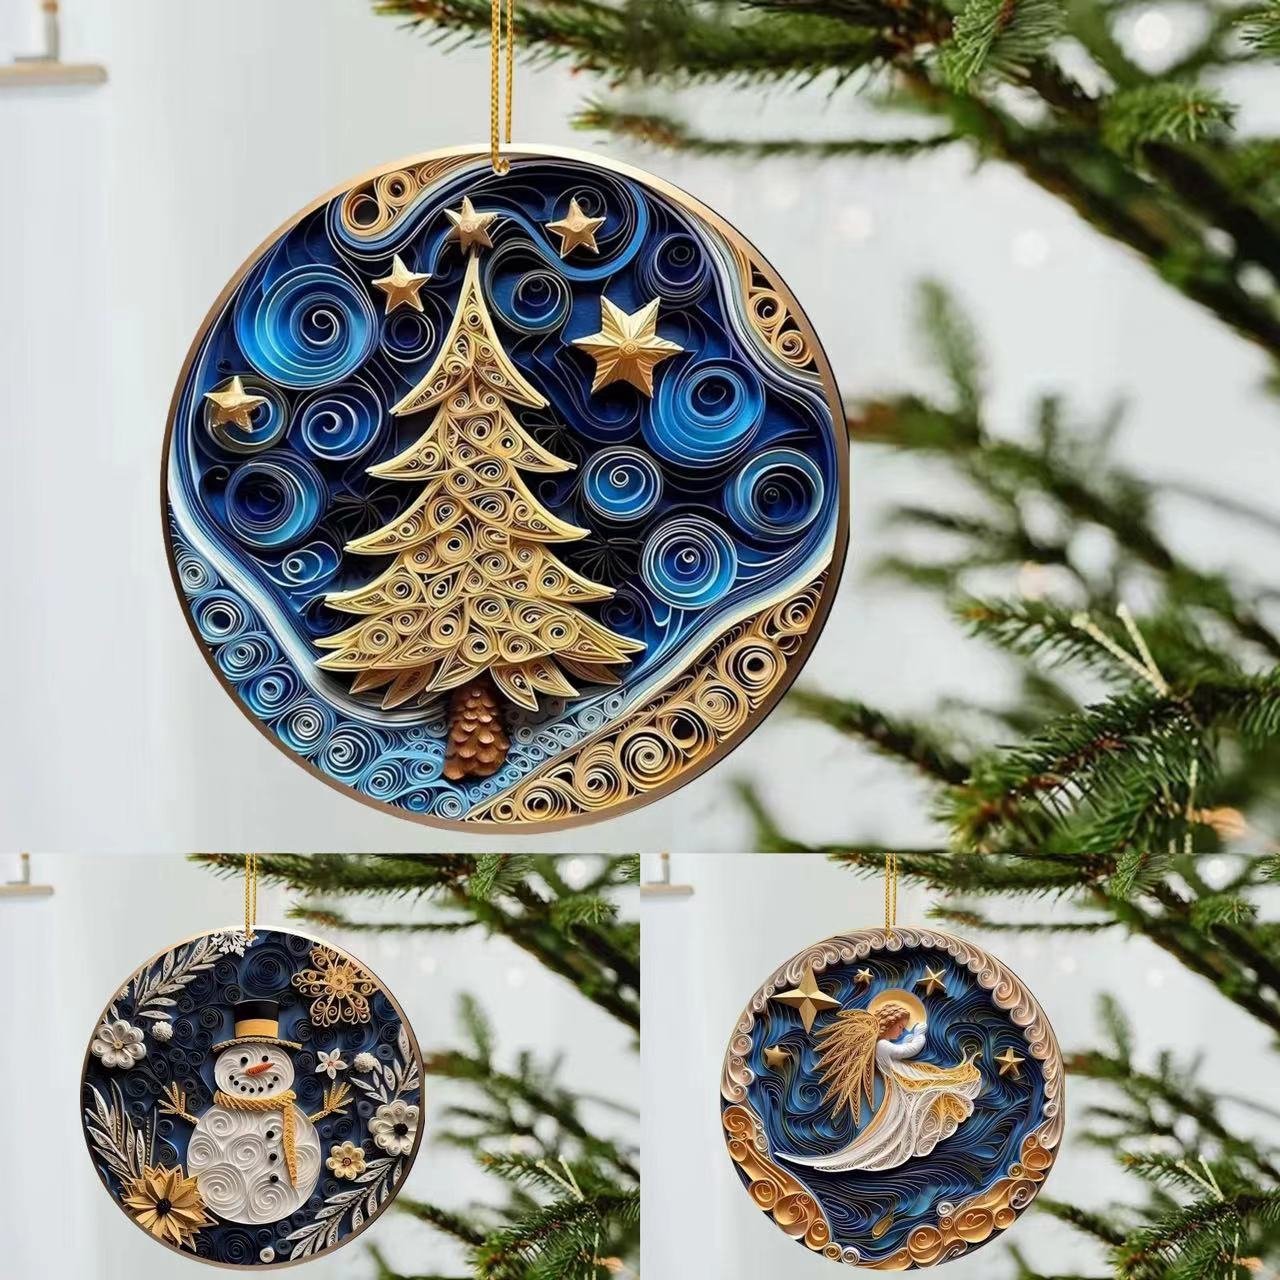 🔥Handmade Ornaments With Good Wishes-Buy 4 Get Extra 20% OFF